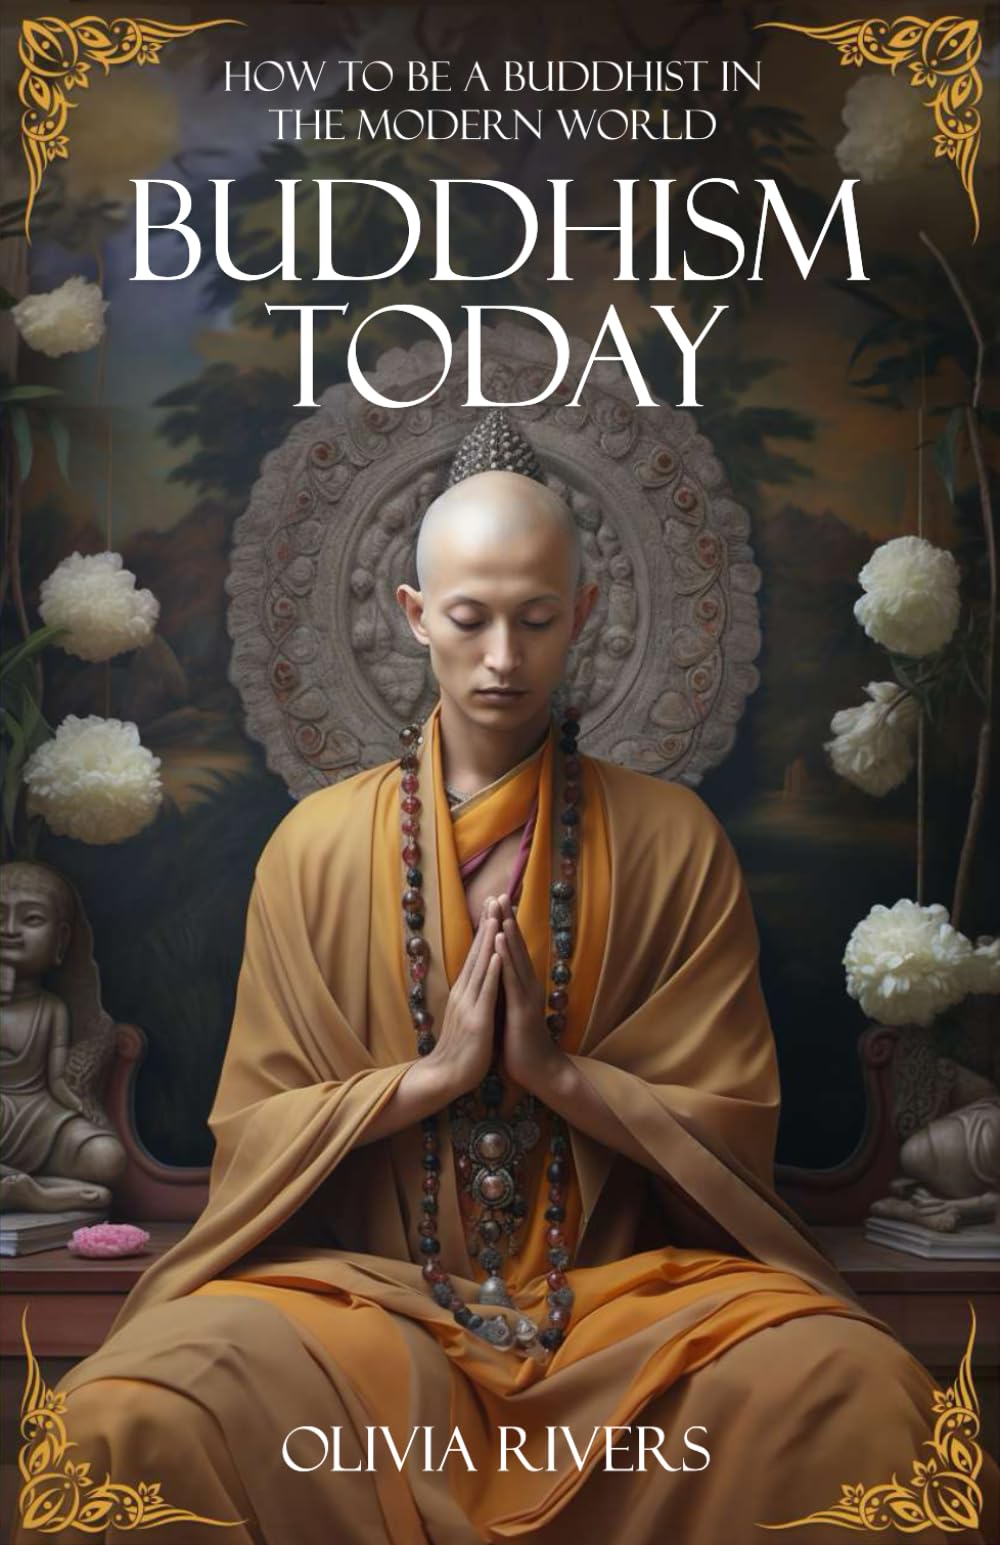 Buddhism Today: How to Be a Buddhist in the Modern World